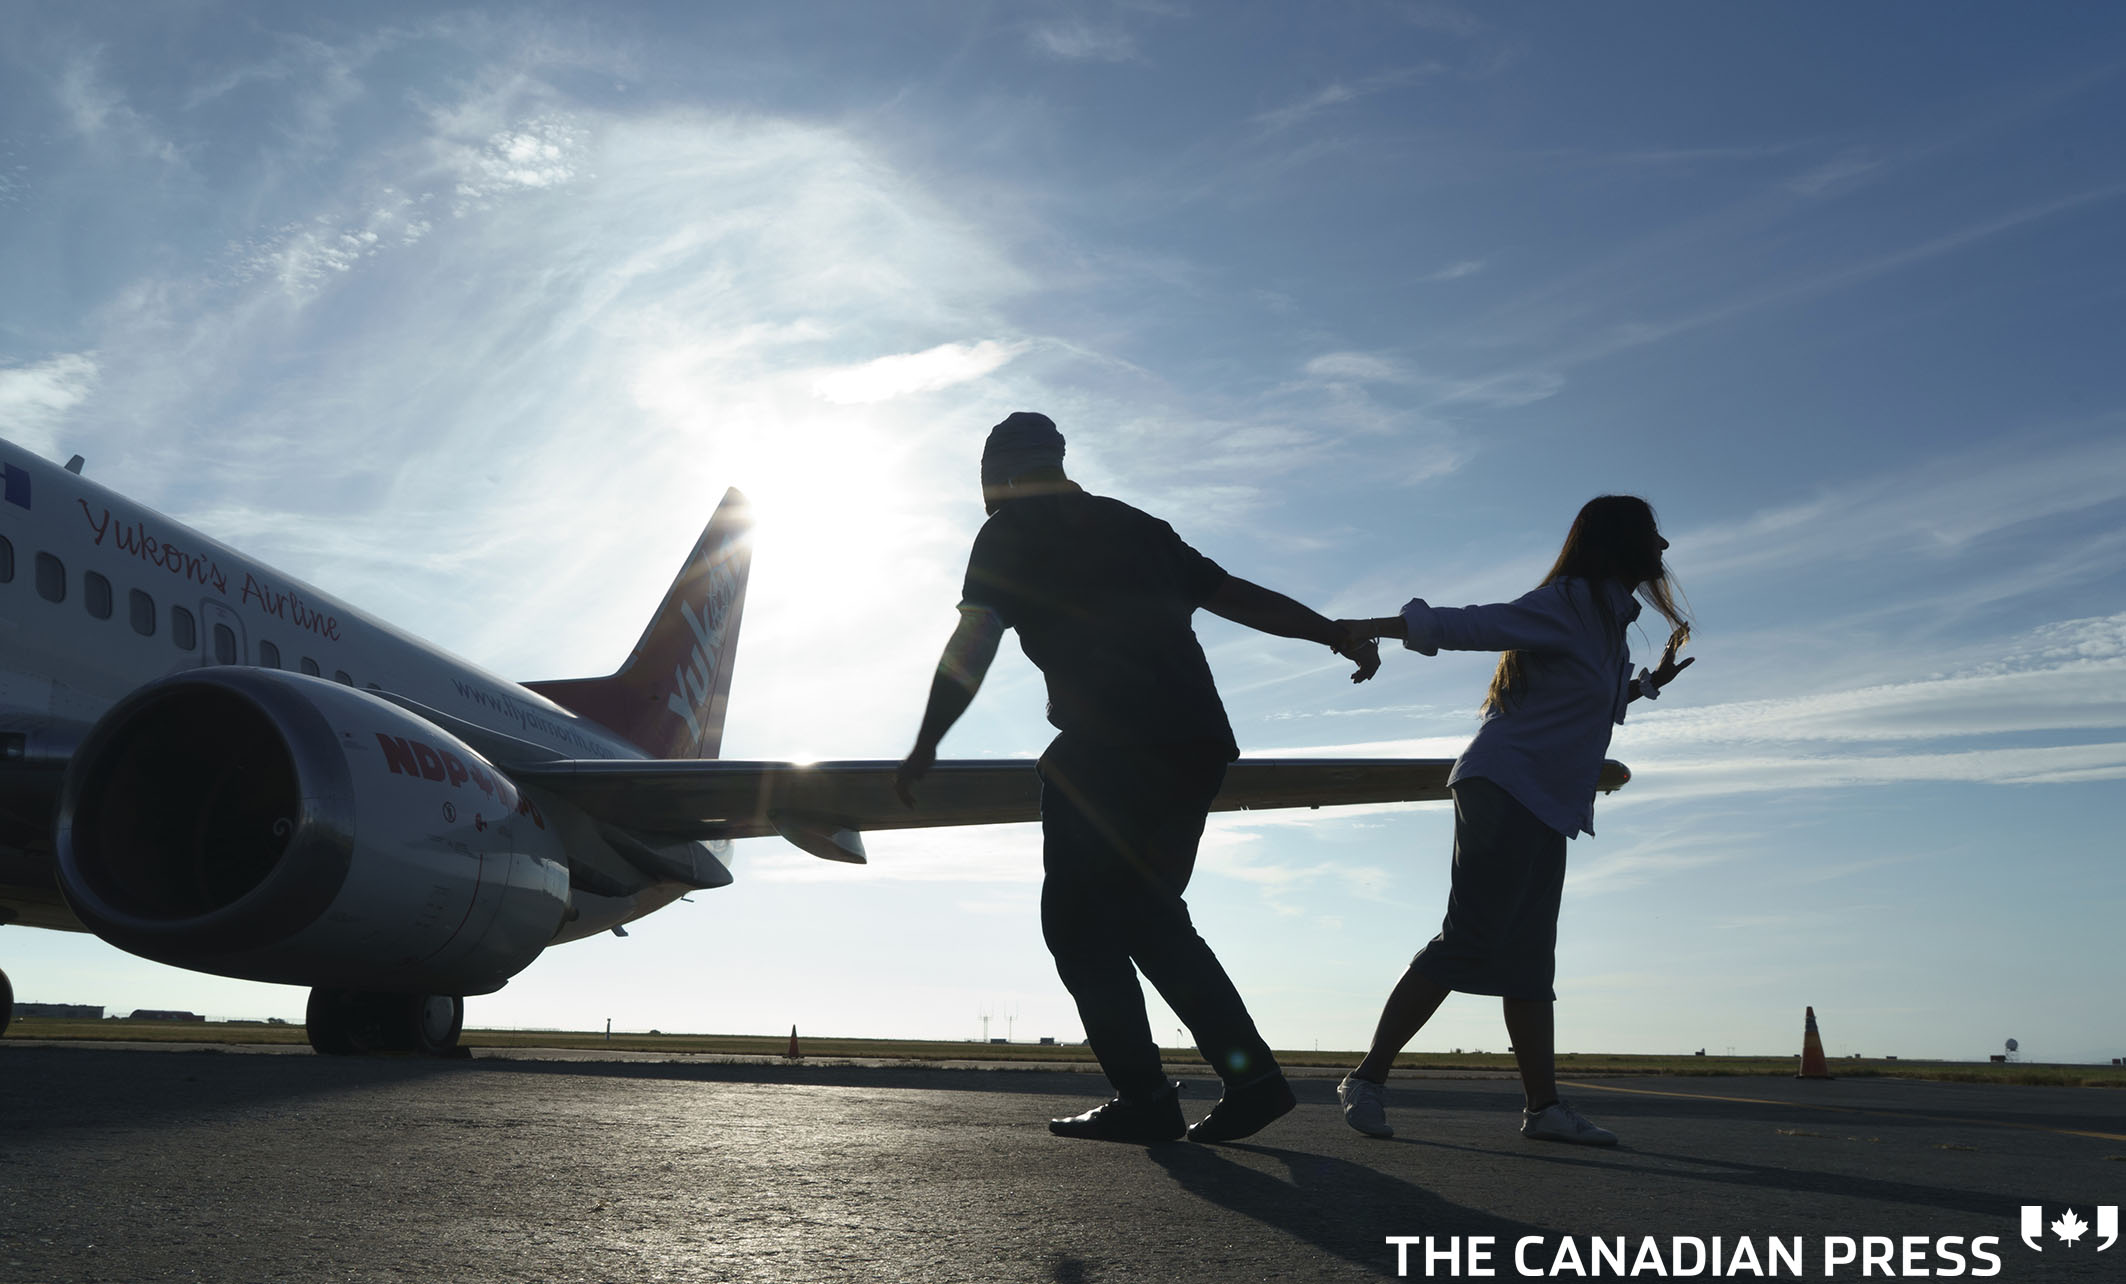 NDP leader Jagmeet Singh and his wife Gurkiran Kaur Sidhu record a tip top dance for Tik Tok by the campaign plane at the airport in Vancouver, on Wednesday, August 18, 2021. THE CANADIAN PRESS/Paul Chiasson